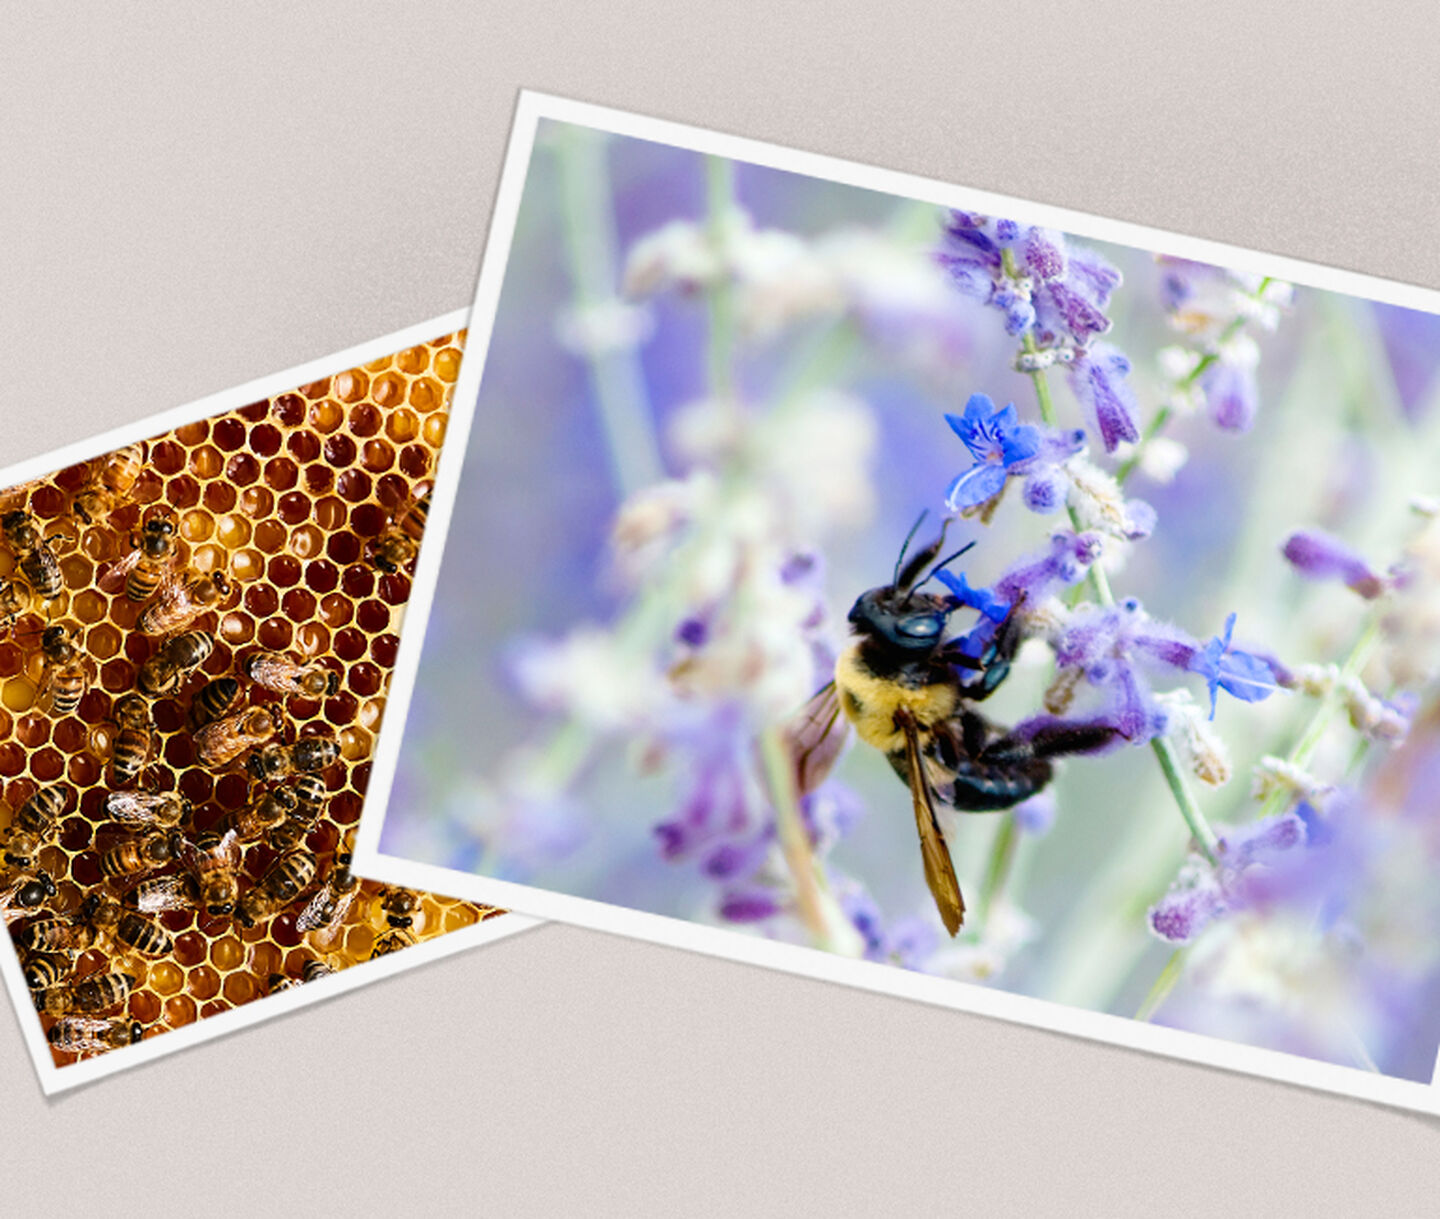 Two photographs of bees. One on a flower and the others in a hive.